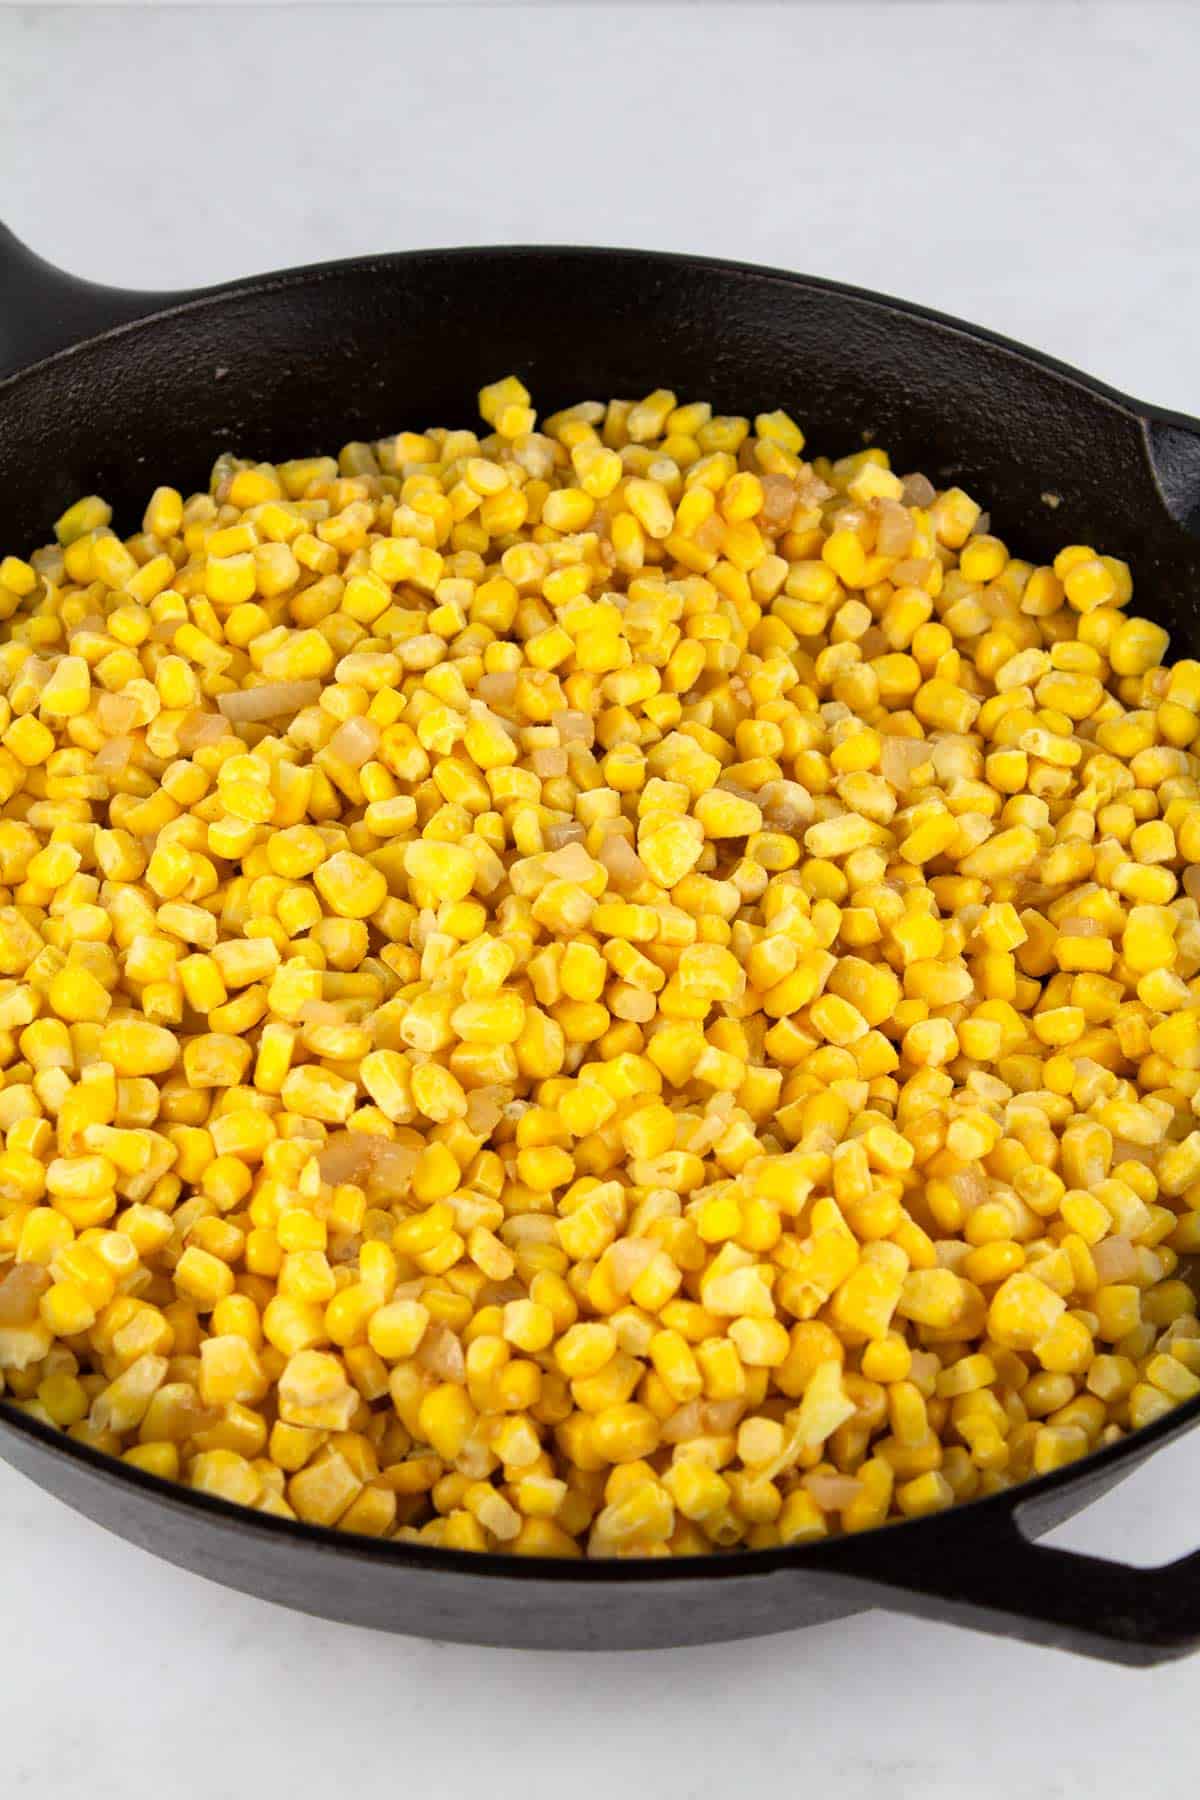 Frozen corn added to onions and garlic in skillet.